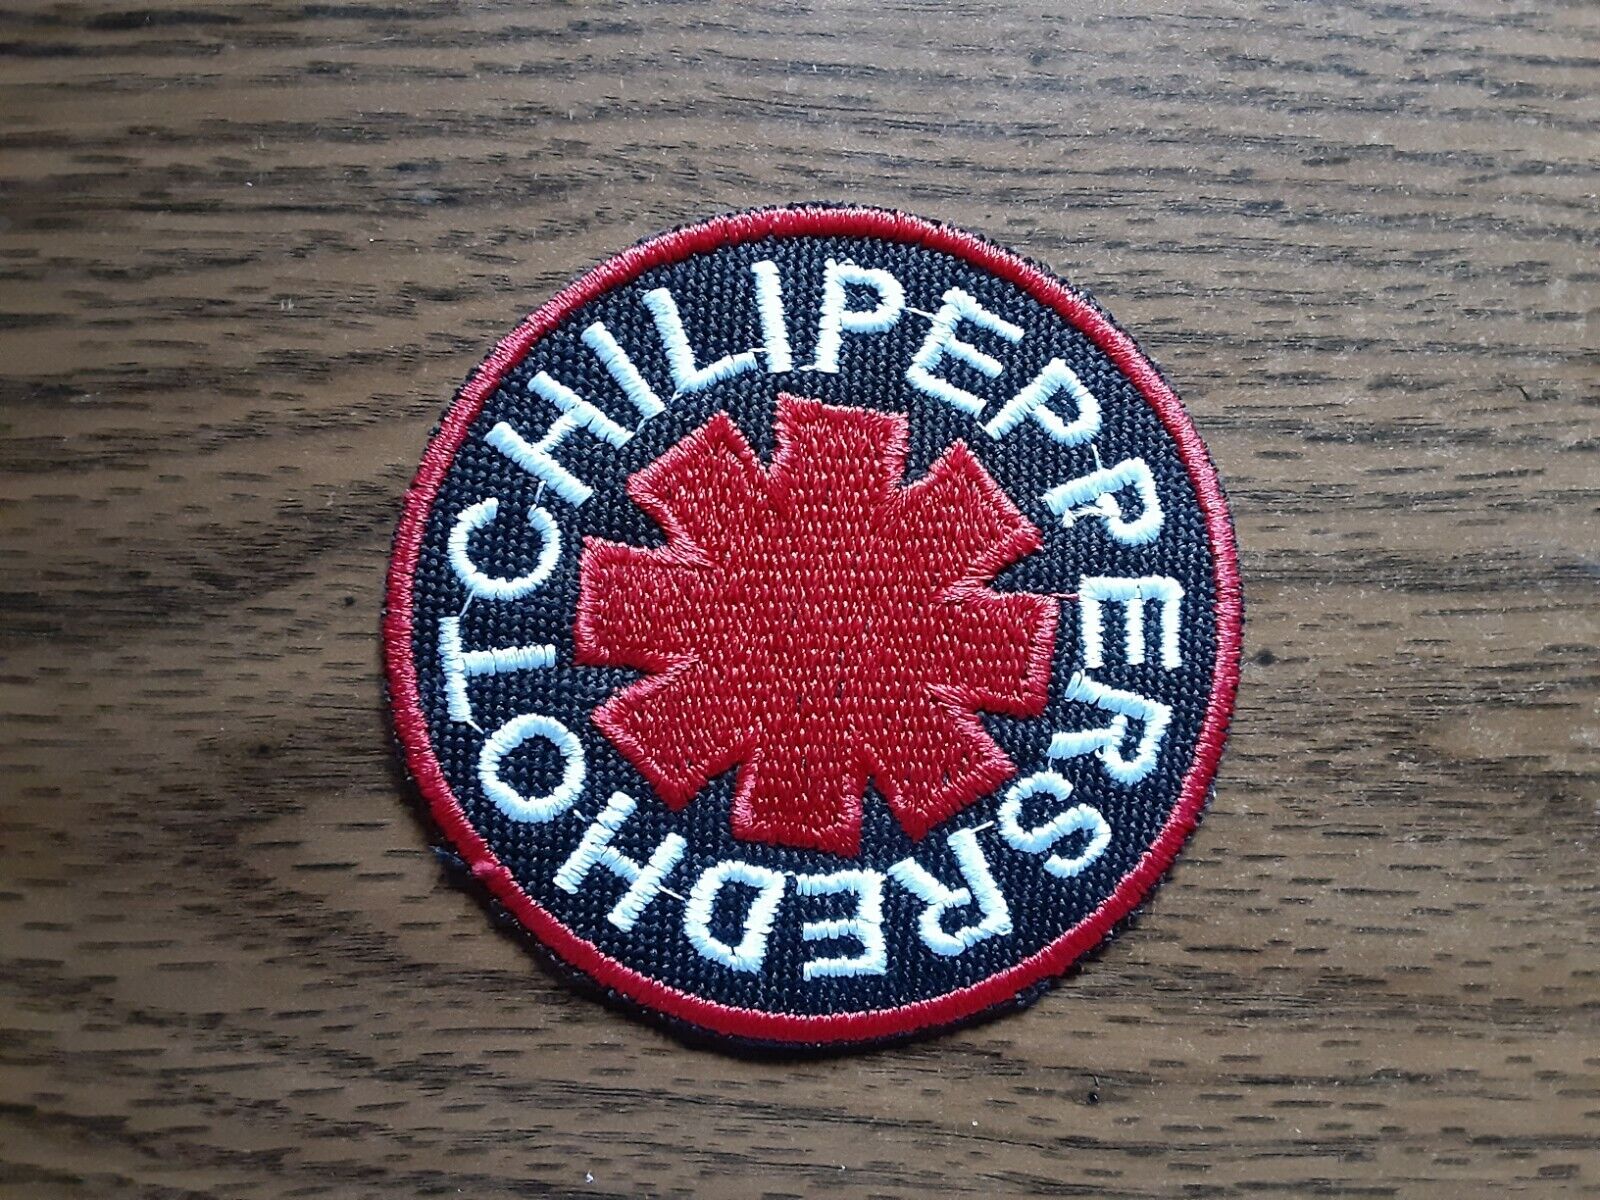 RED HOT CHILI PEPPERS+ LOGO Sale IRON WHITE AND PA Rare ON EMBROIDERED